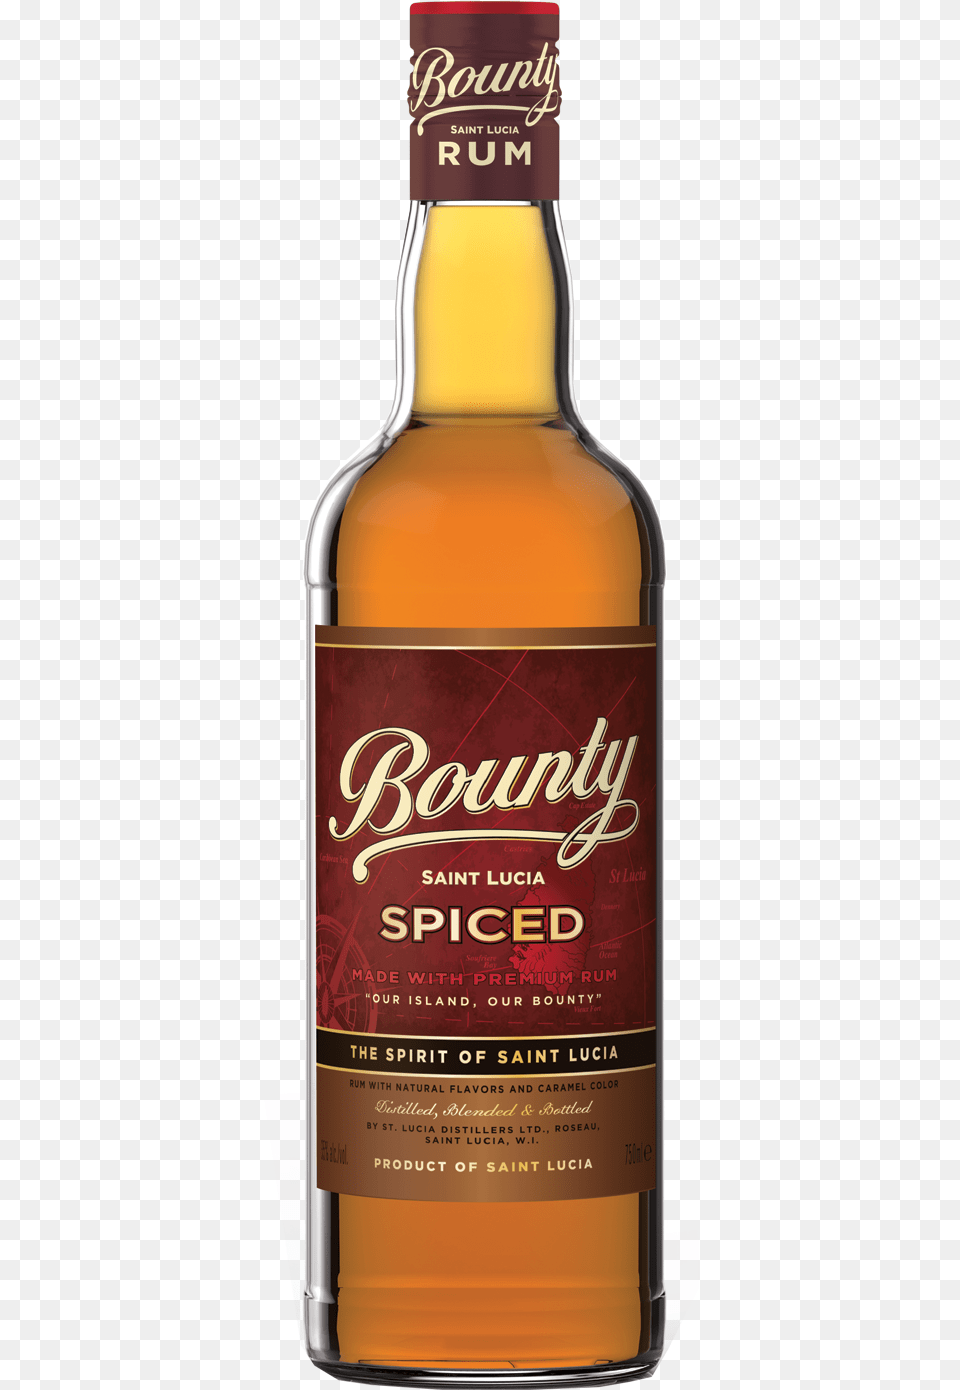 Bounty Rum Spiced St Lucia Rum Ron Swanson39s Favorite Whiskey, Alcohol, Beer, Beverage, Liquor Png Image